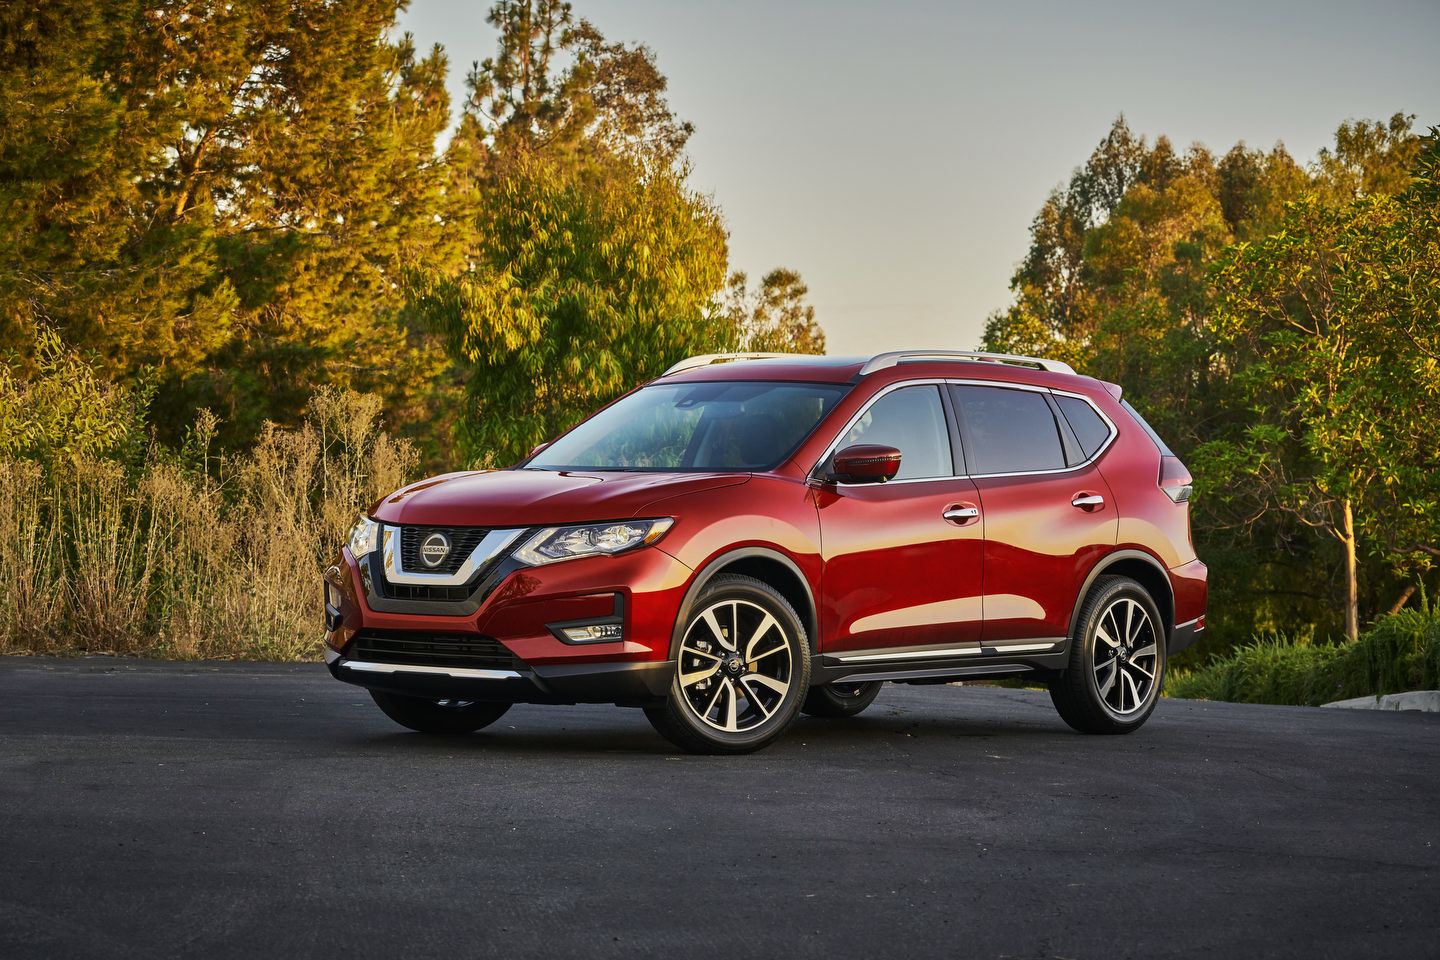 A Look at Nissan’s Certified Pre-Owned Vehicle Program